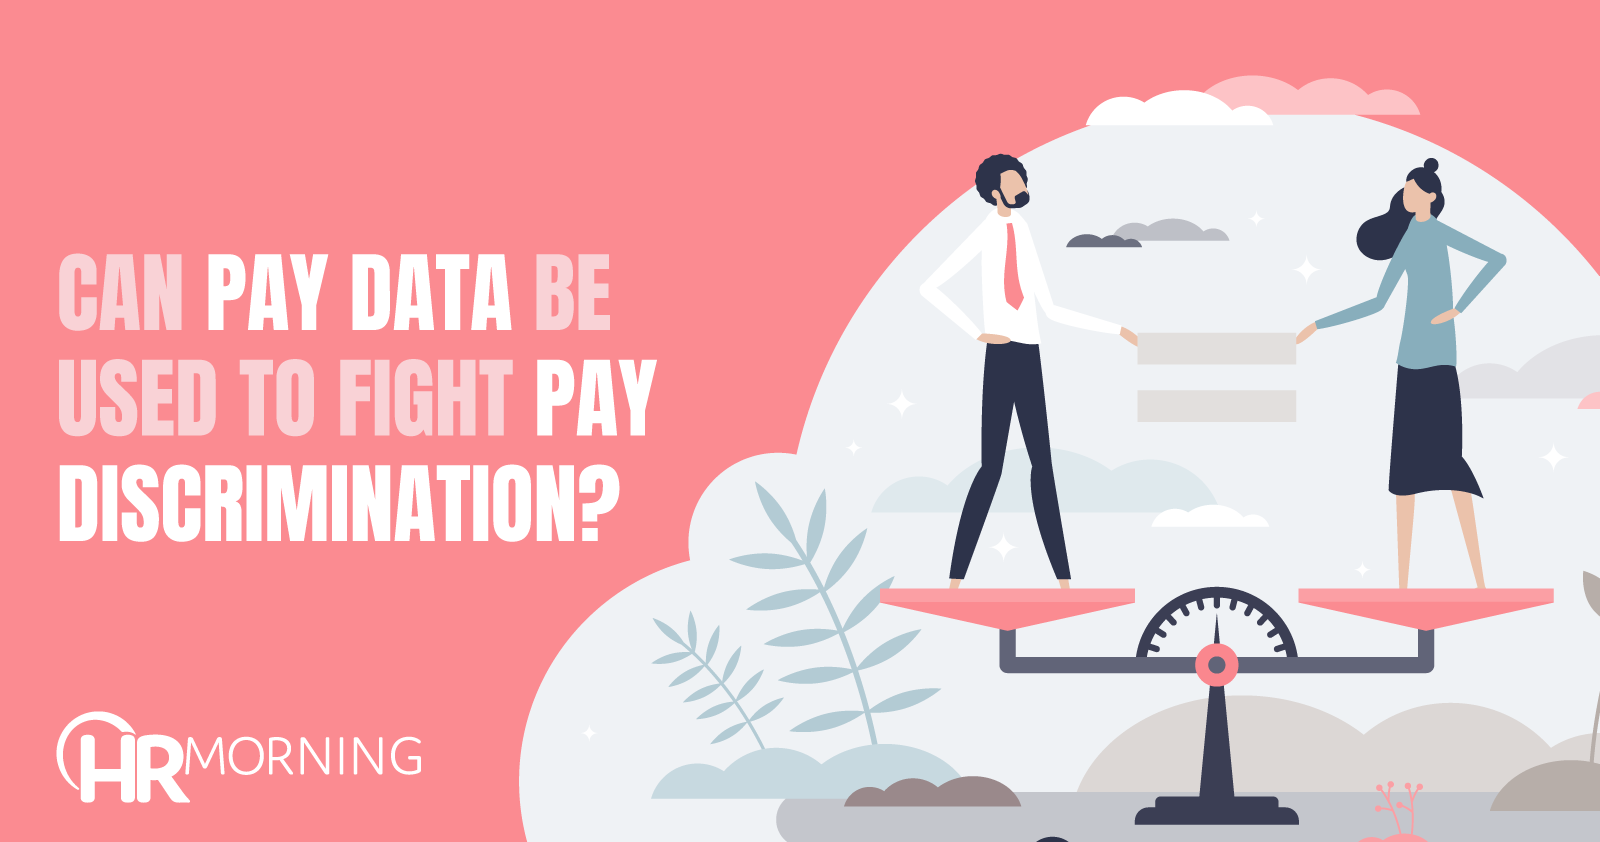 Can pay data be used to fight pay discrimination?